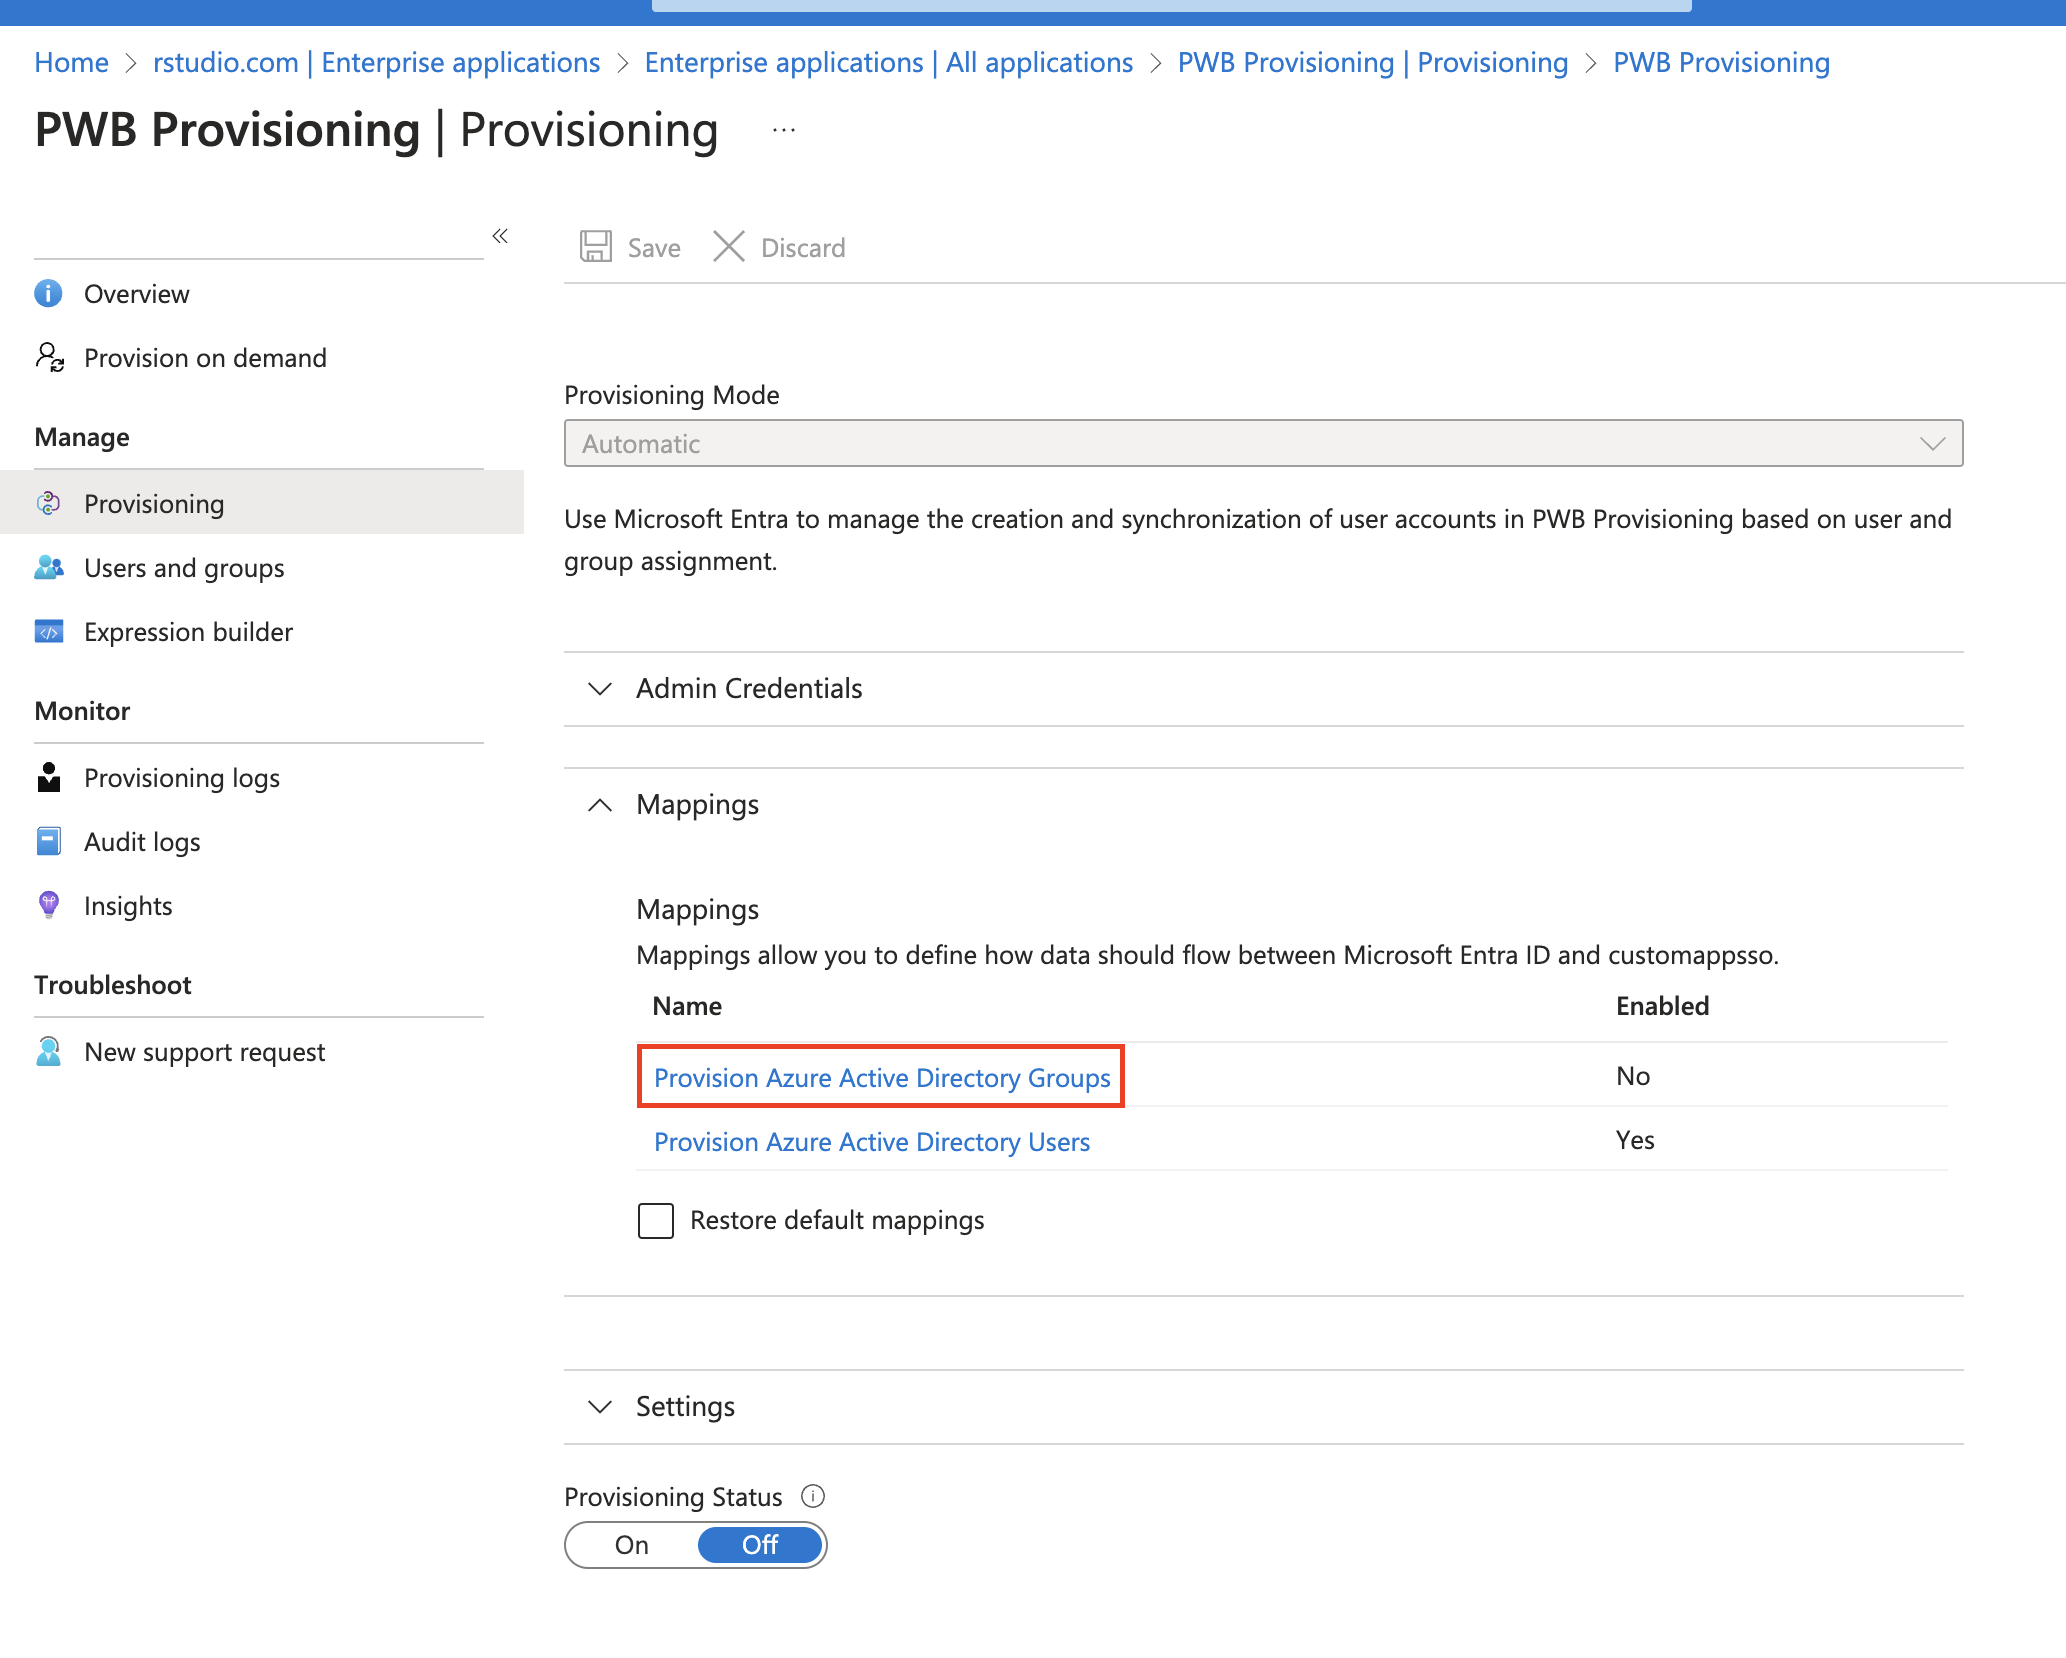 Screenshot of the Provisioning blade with the Mappings section expanded and the Provision Azure Active Directory Groups option highlighted.